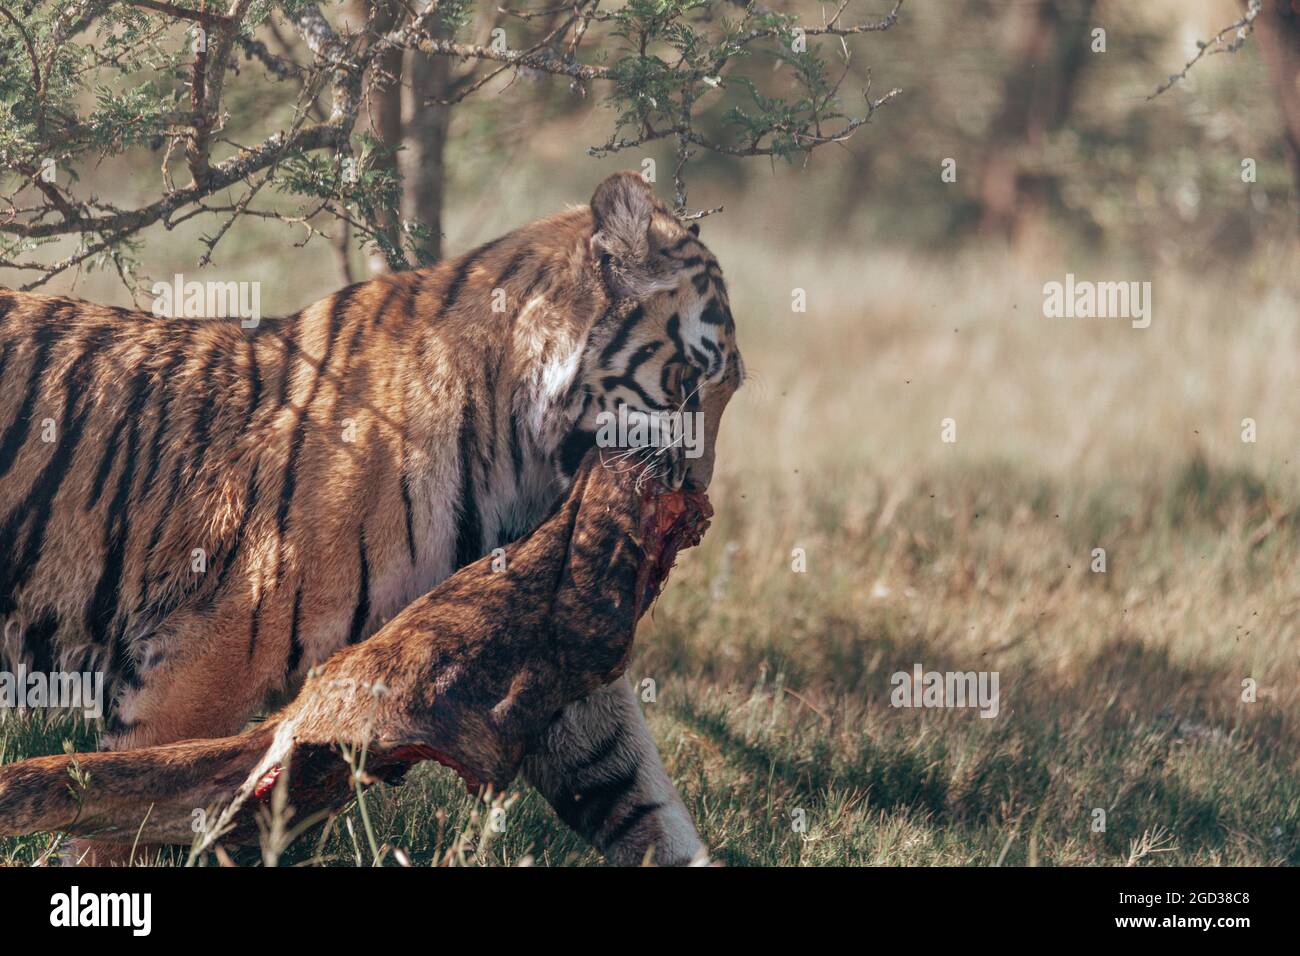 Tiger walking off with its catch. Stock Photo